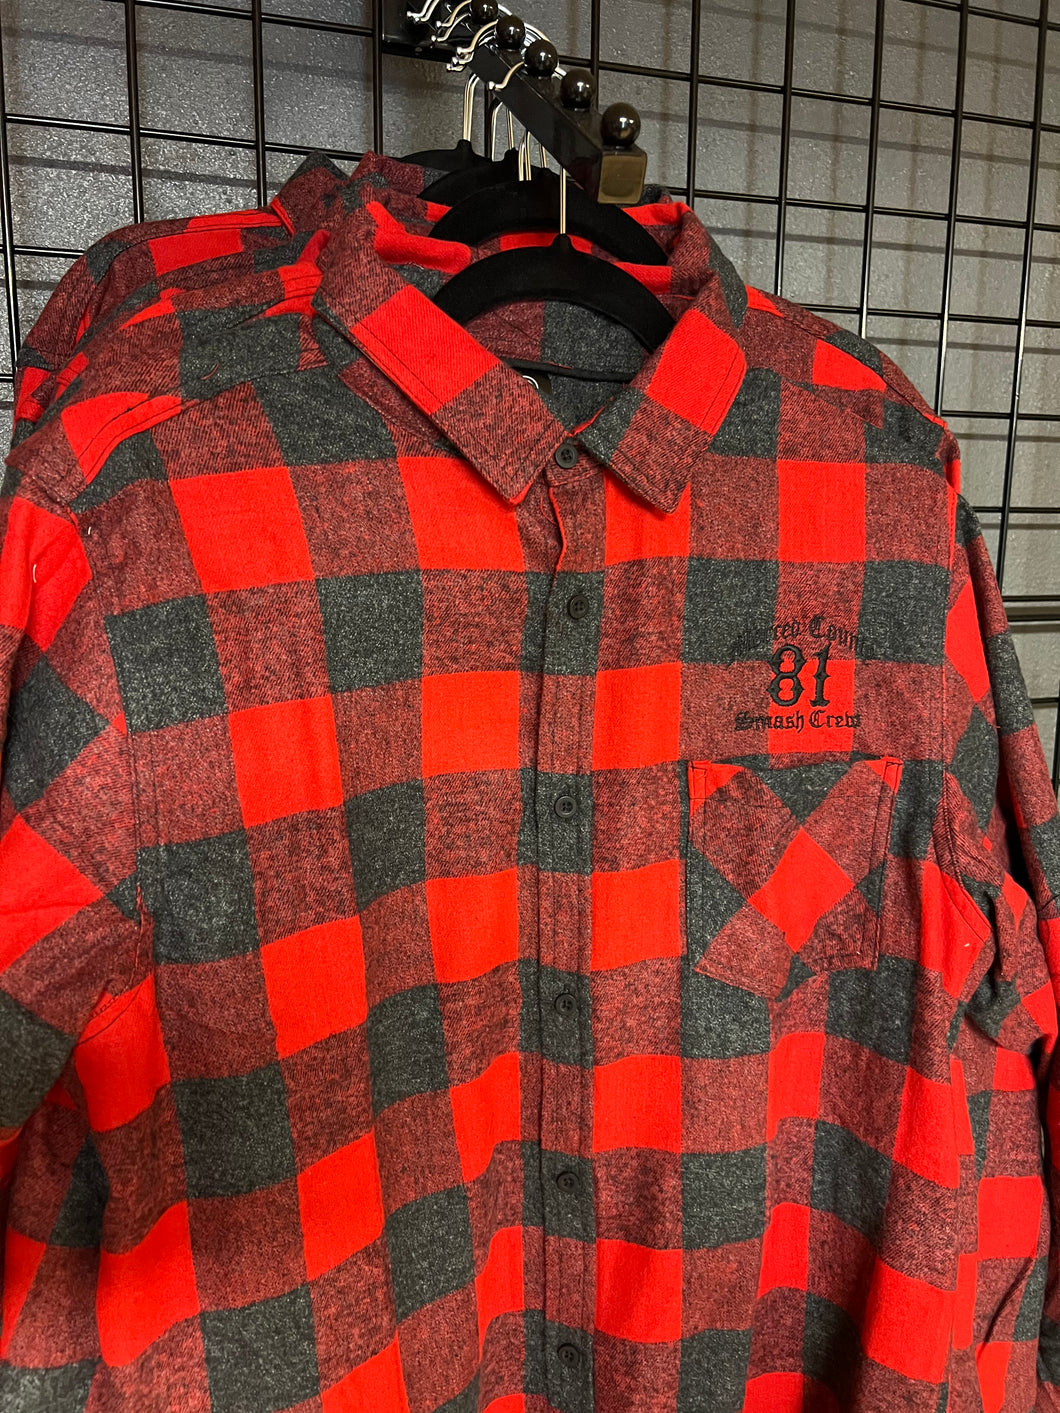 Embroidered Flannel